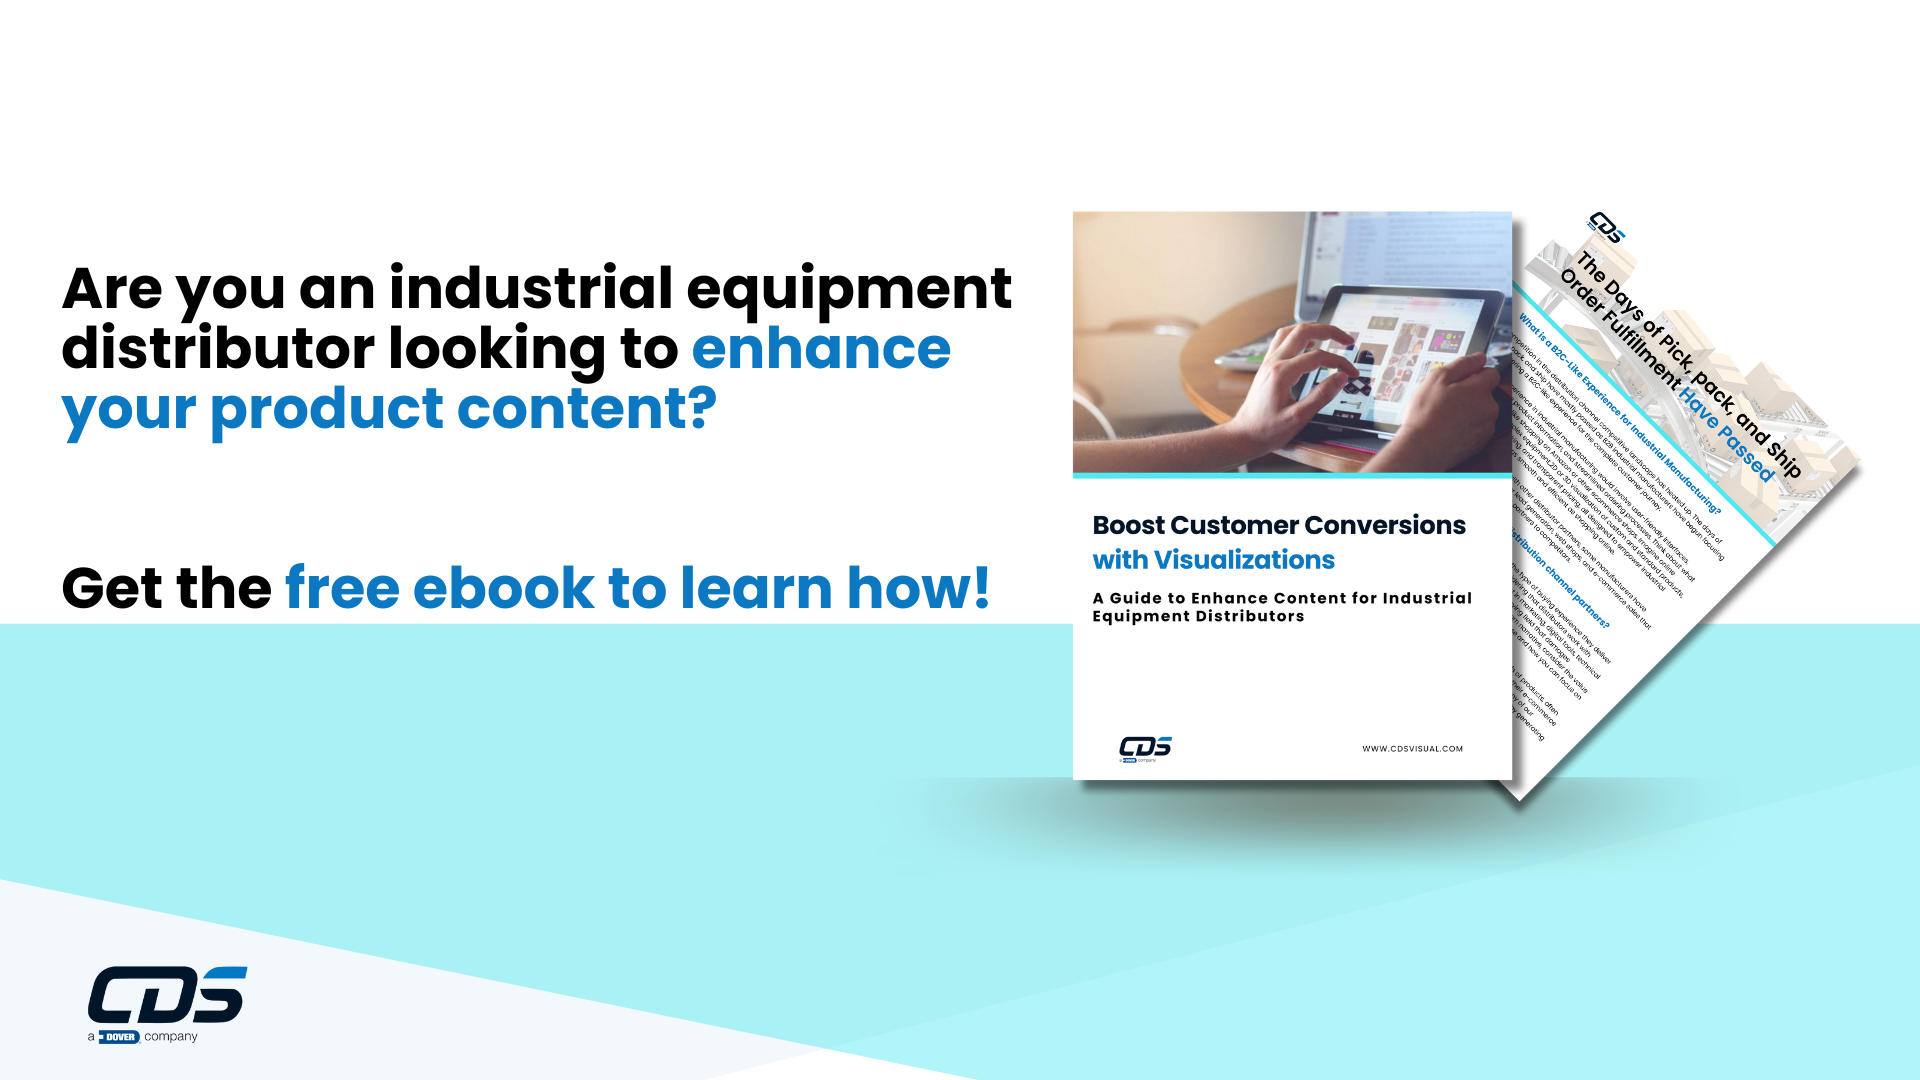 A Guide to Enhance Content for Industrial Equipment Distributors